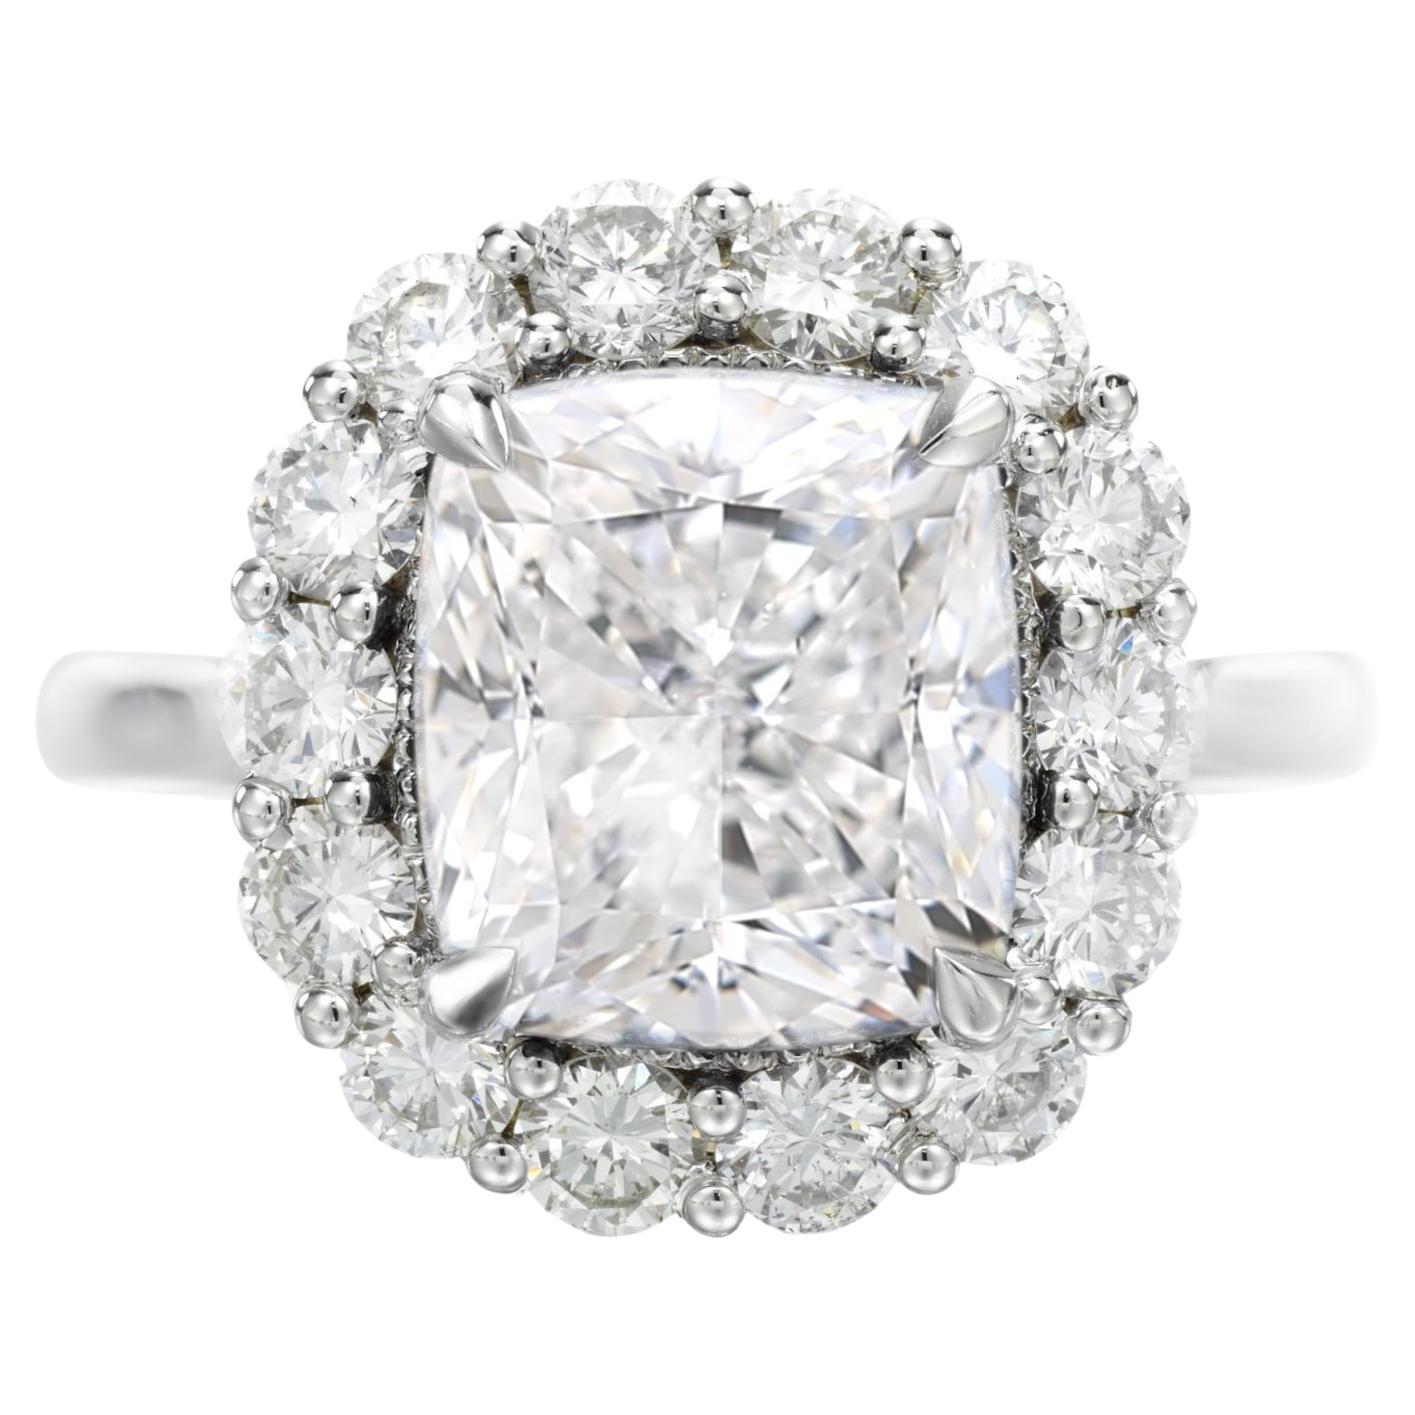 GIA Certified 4 Carat D Color Cushion Cut Diamond White Gold Ring